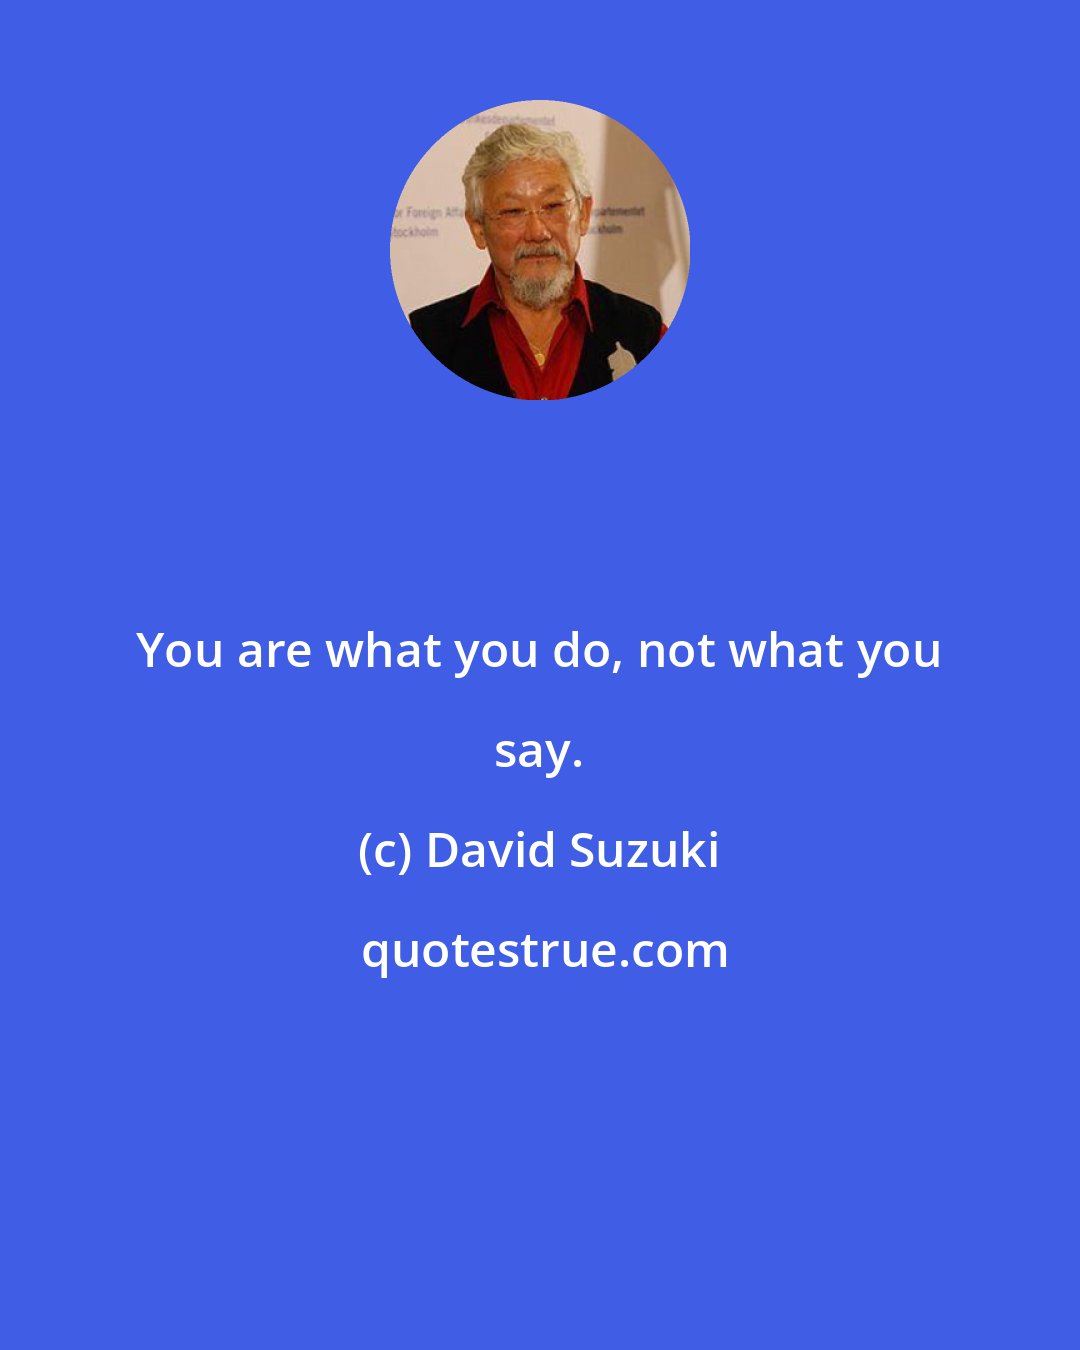 David Suzuki: You are what you do, not what you say.